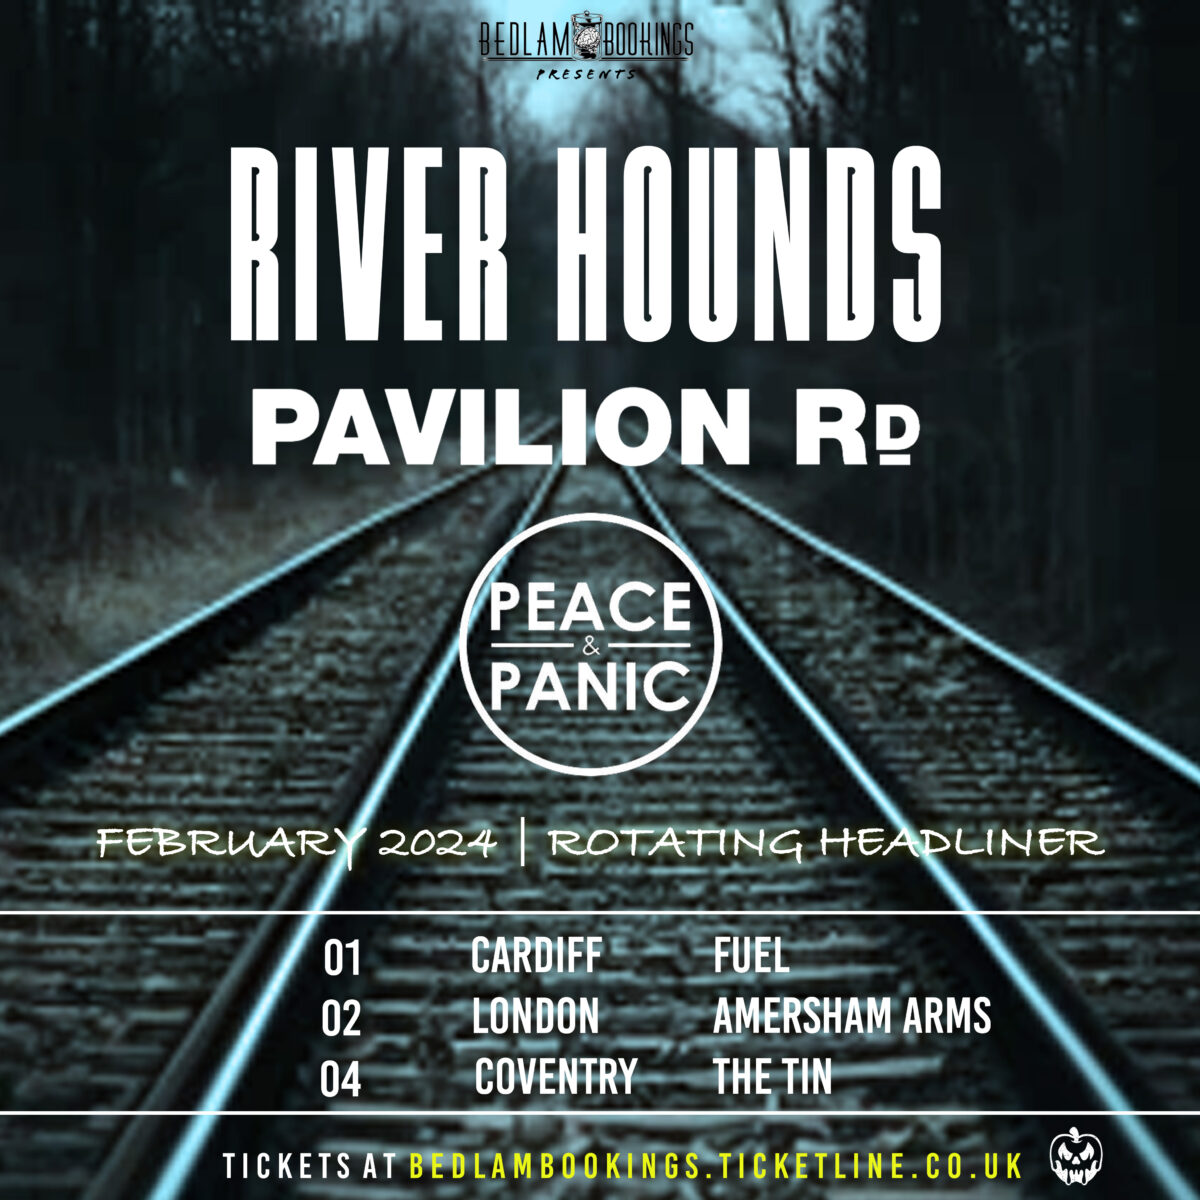 Poster for Bedlam Bookings presents Peace & Panic, River Hounds and Pavilion Rd at The Tin Music and Arts on Sunday 4th February 2024. White text with band logos and tour dates against an image of two parallel railway tracks.